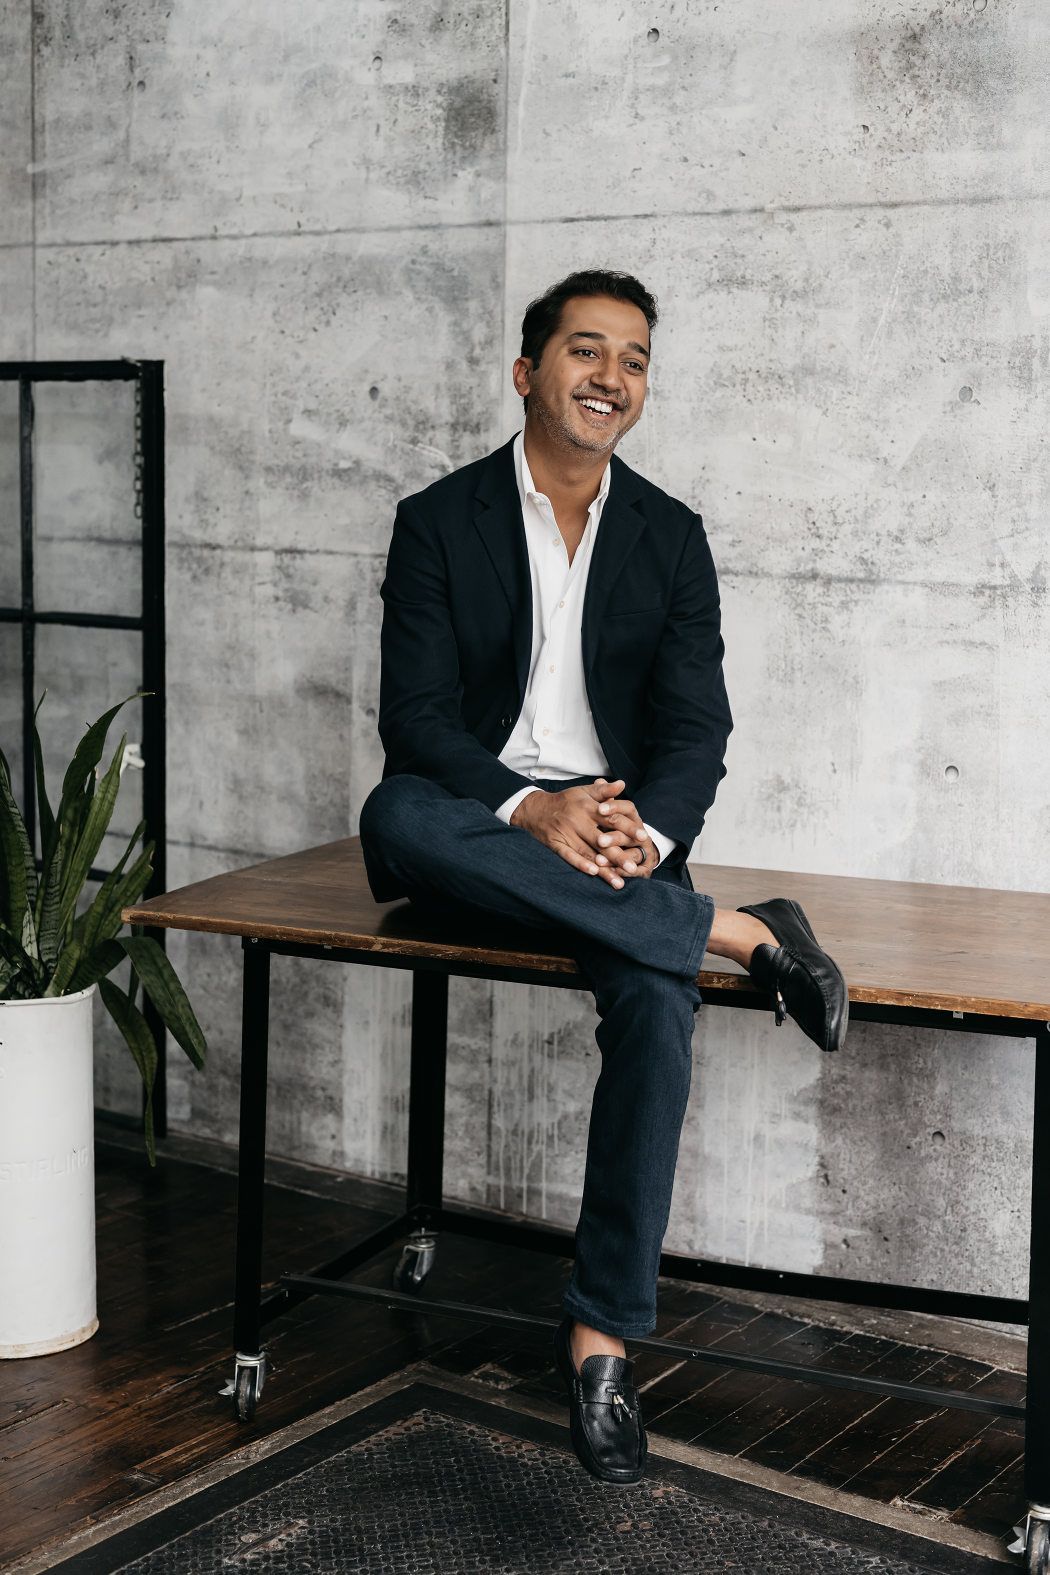 Man smiling during a personal brand photography session, seated on a table in a loft-style room with exposed concrete walls and aged wooden floors.